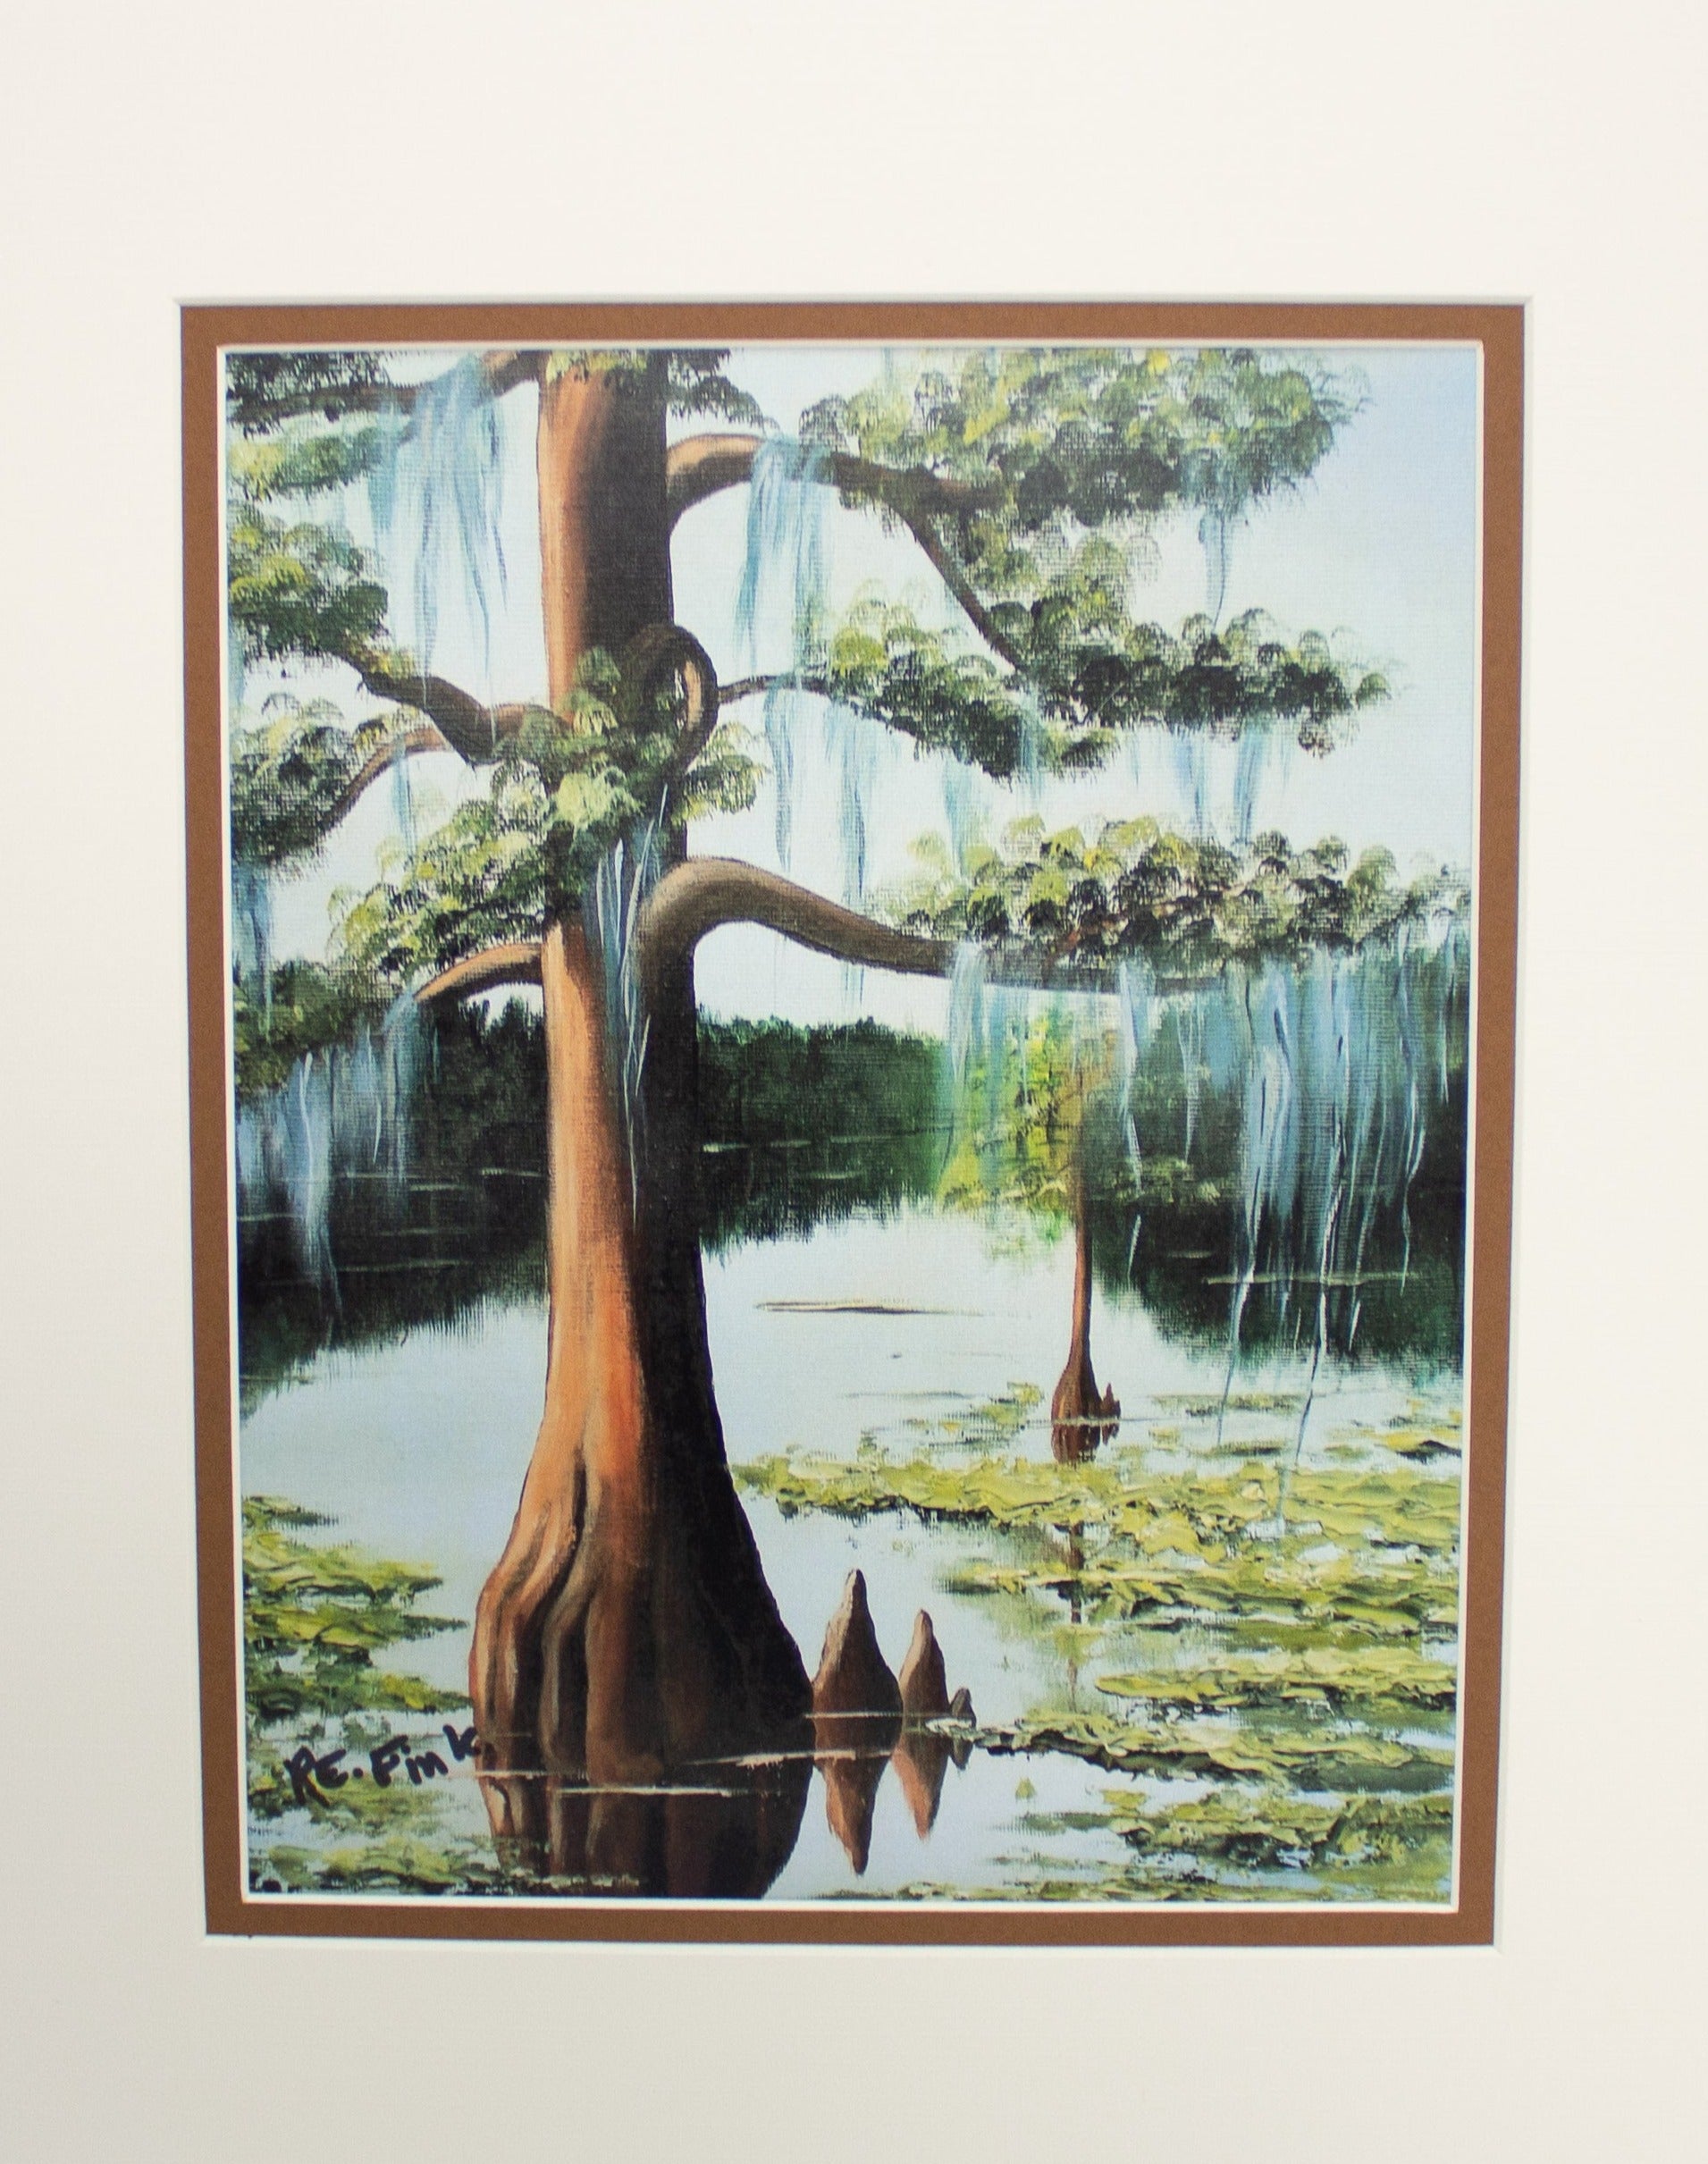 "Cypress Tree and Knees" Matted Print (8x10)